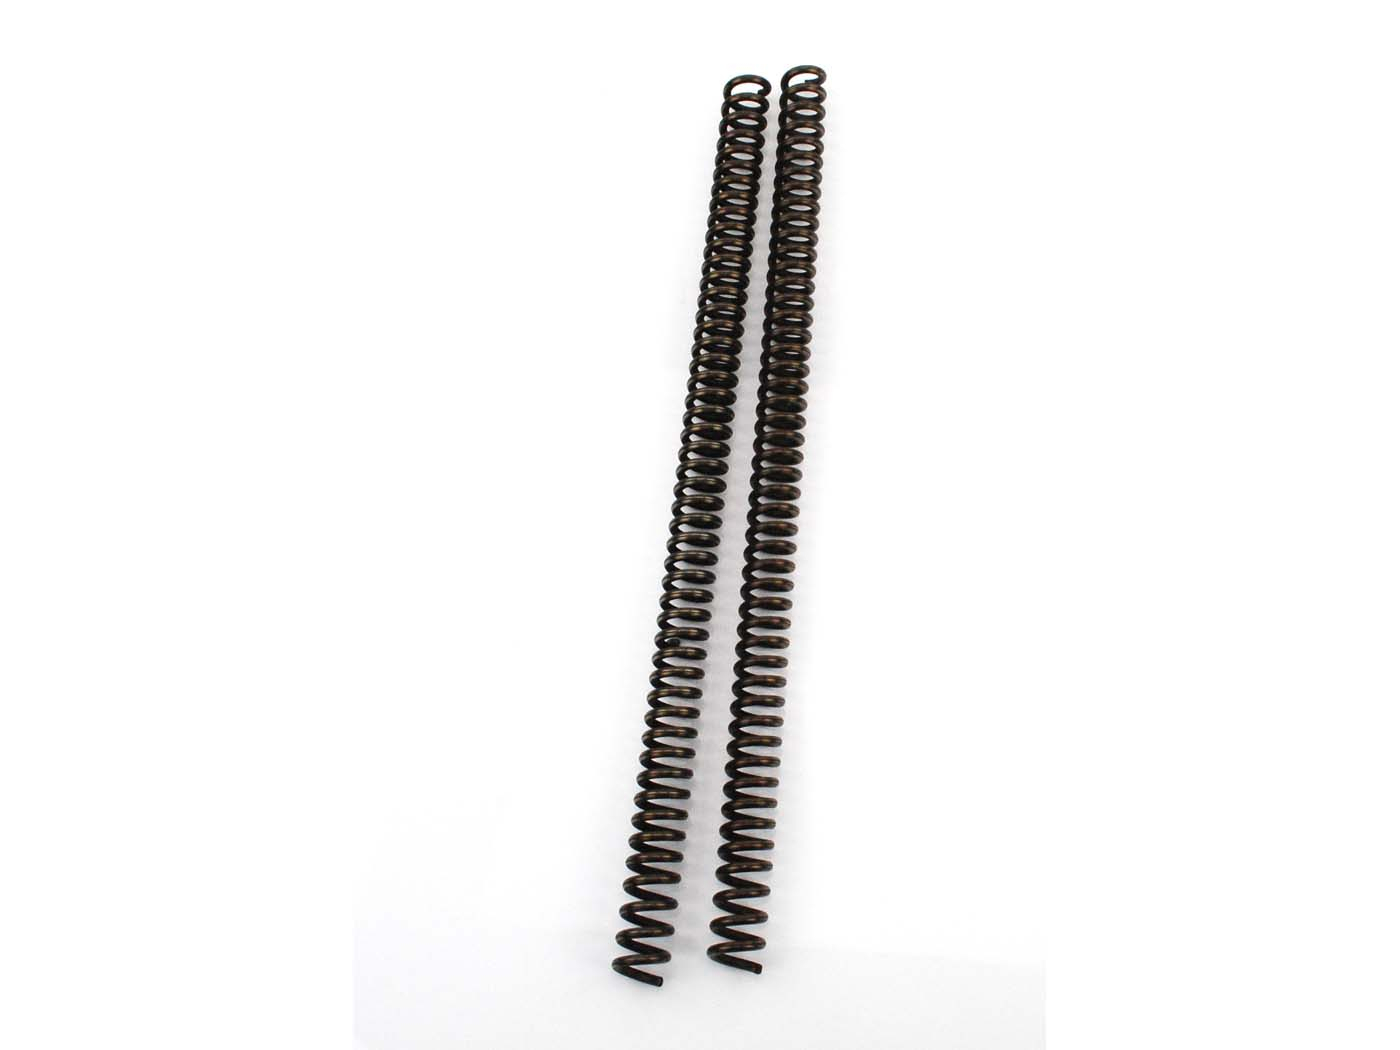 Fork Spring Pränafa 2 Pieces Length Approx. 400mm Diameter 22mm Wire Thickness 4mm For Hercules Supra 4 GP